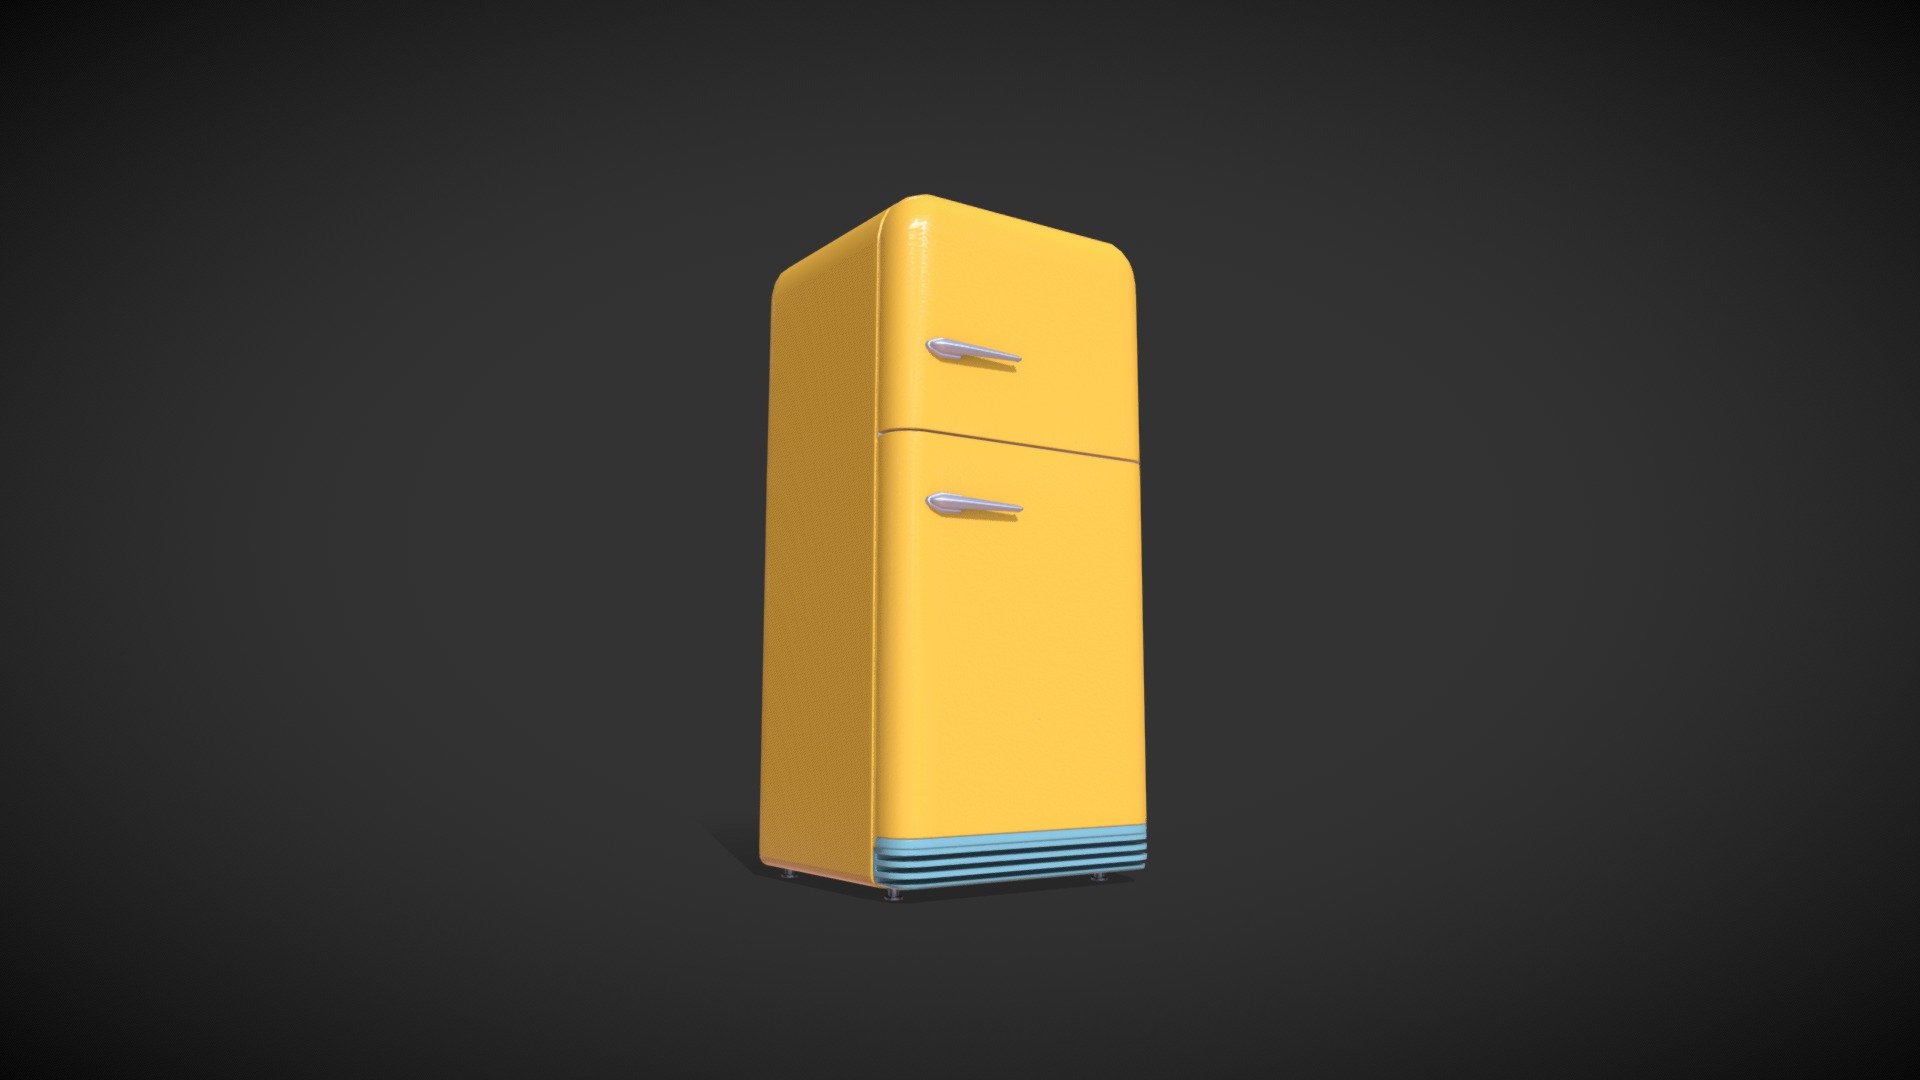 Extra files include:

ma

fridge.ma &gt; source file, mesh with simply constrained rig and full PBR texture

fridge_animated.ma &gt; source file, mesh with a simply constrained rig, revisable animation, and full PBR texture

fbx

fridge.fbx &gt; mesh with full PBR texture embed

fridge_animated.fbx &gt; mesh with full PBR texture embed and baked animation

obj

fridge.obj &gt; mesh with tiled UV

texture in different channels including:
Ao, BaseColor, Metallic, Normal, Opacity and Roughness channel - Animated Fridge - Buy Royalty Free 3D model by Gavin Ma (@gavinma718) 3d model